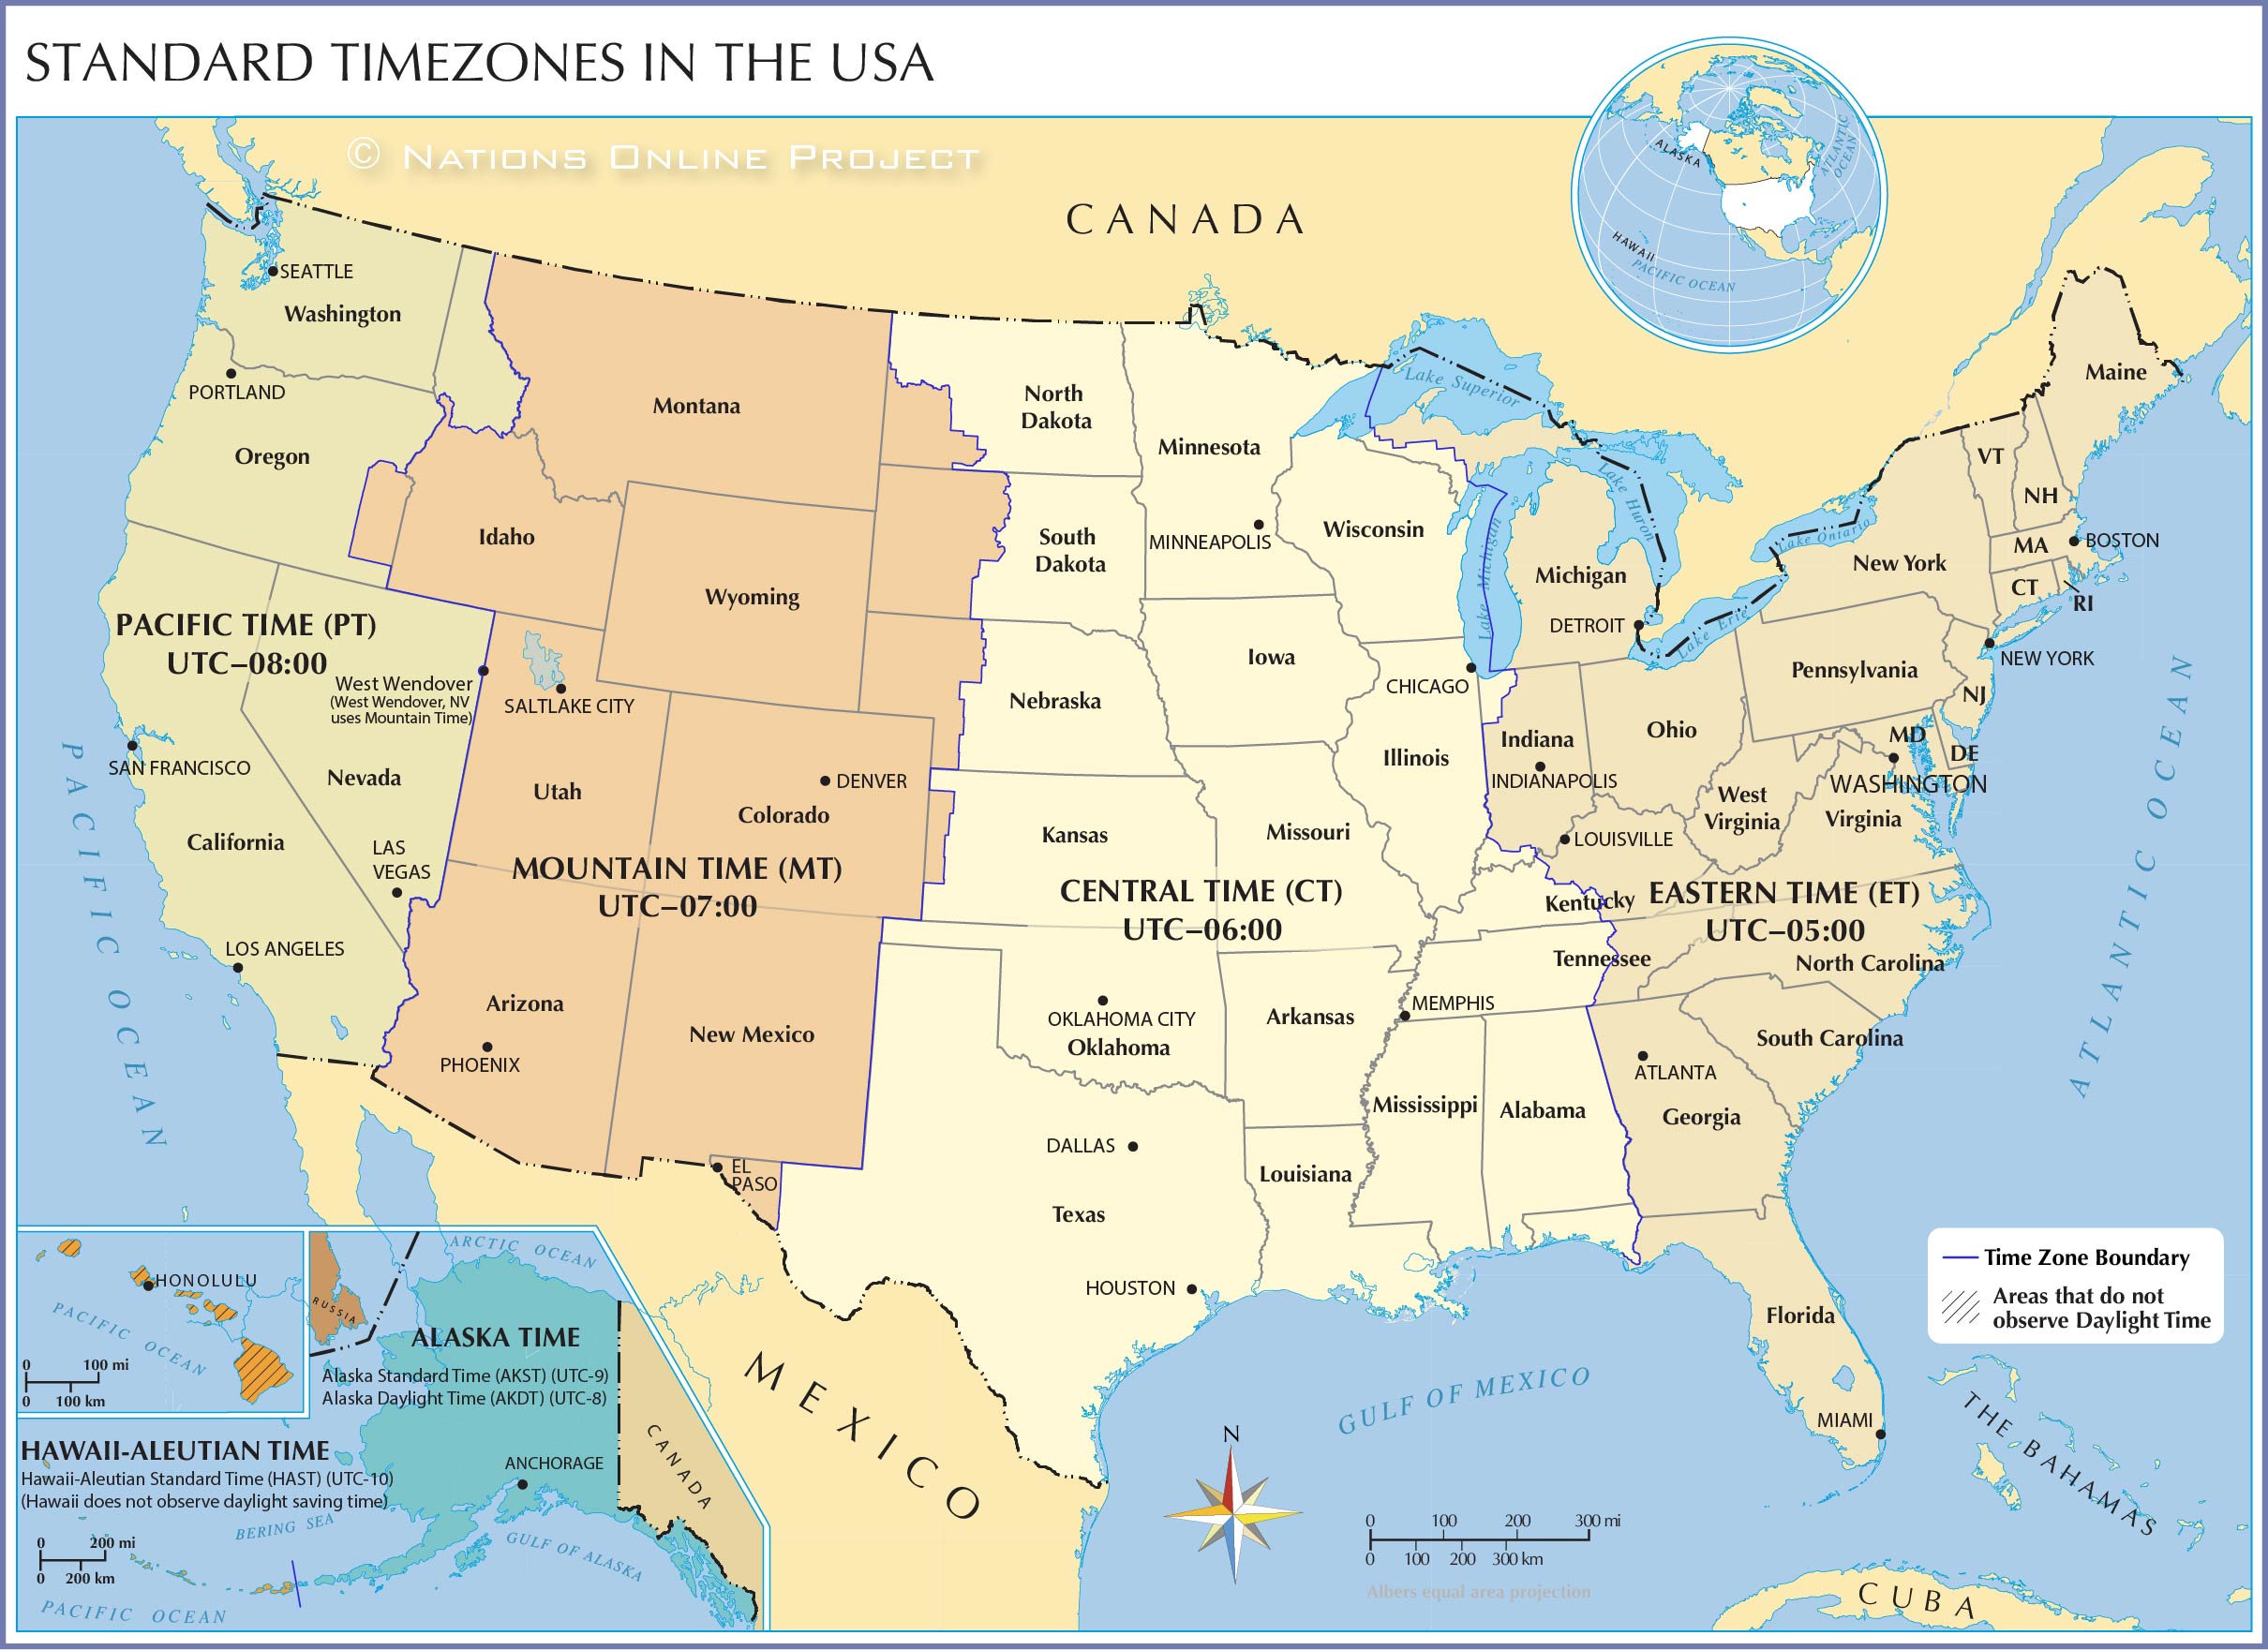 Time Zone in USA Fluxzy the guide for your web matters